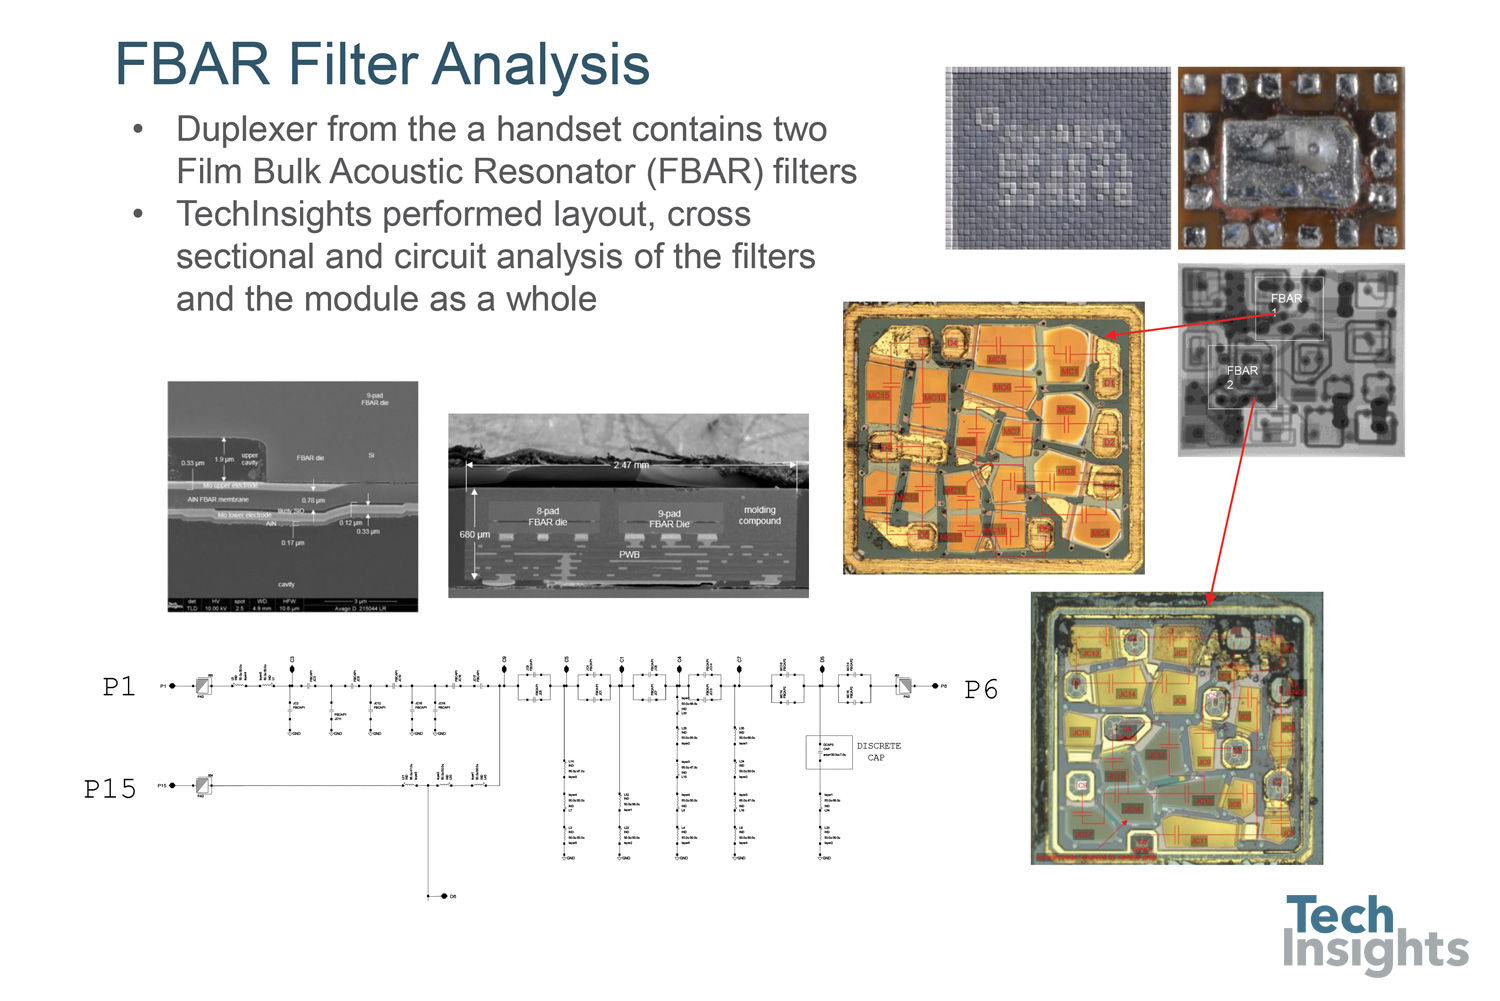 Analysis of film bulk acoustic resonator (FBAR) filter. This is a process and circuit analysis of the FBAR filter from a duplexer from a mobile phone. The need for new filter technologies for the mm wave generation will bring about greater interest in this type of analysis.